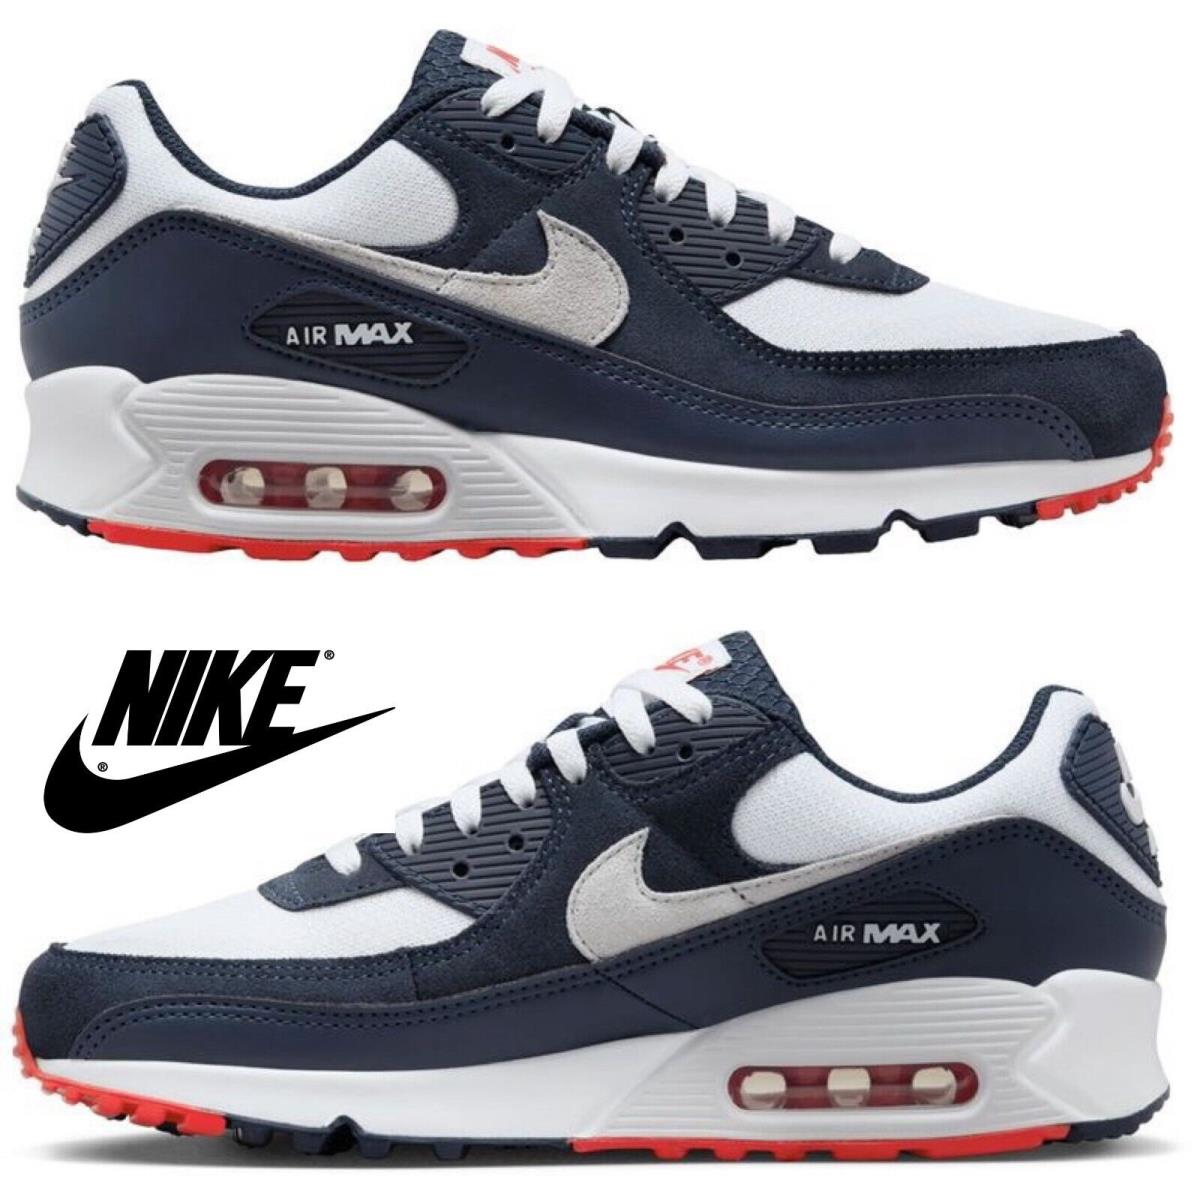 Nike Air Max 90 Casual Men`s Sneakers Running Athletic Sport Comfort Shoes Navy - Blue , Dark Obsidian/White/Red Maufacturer